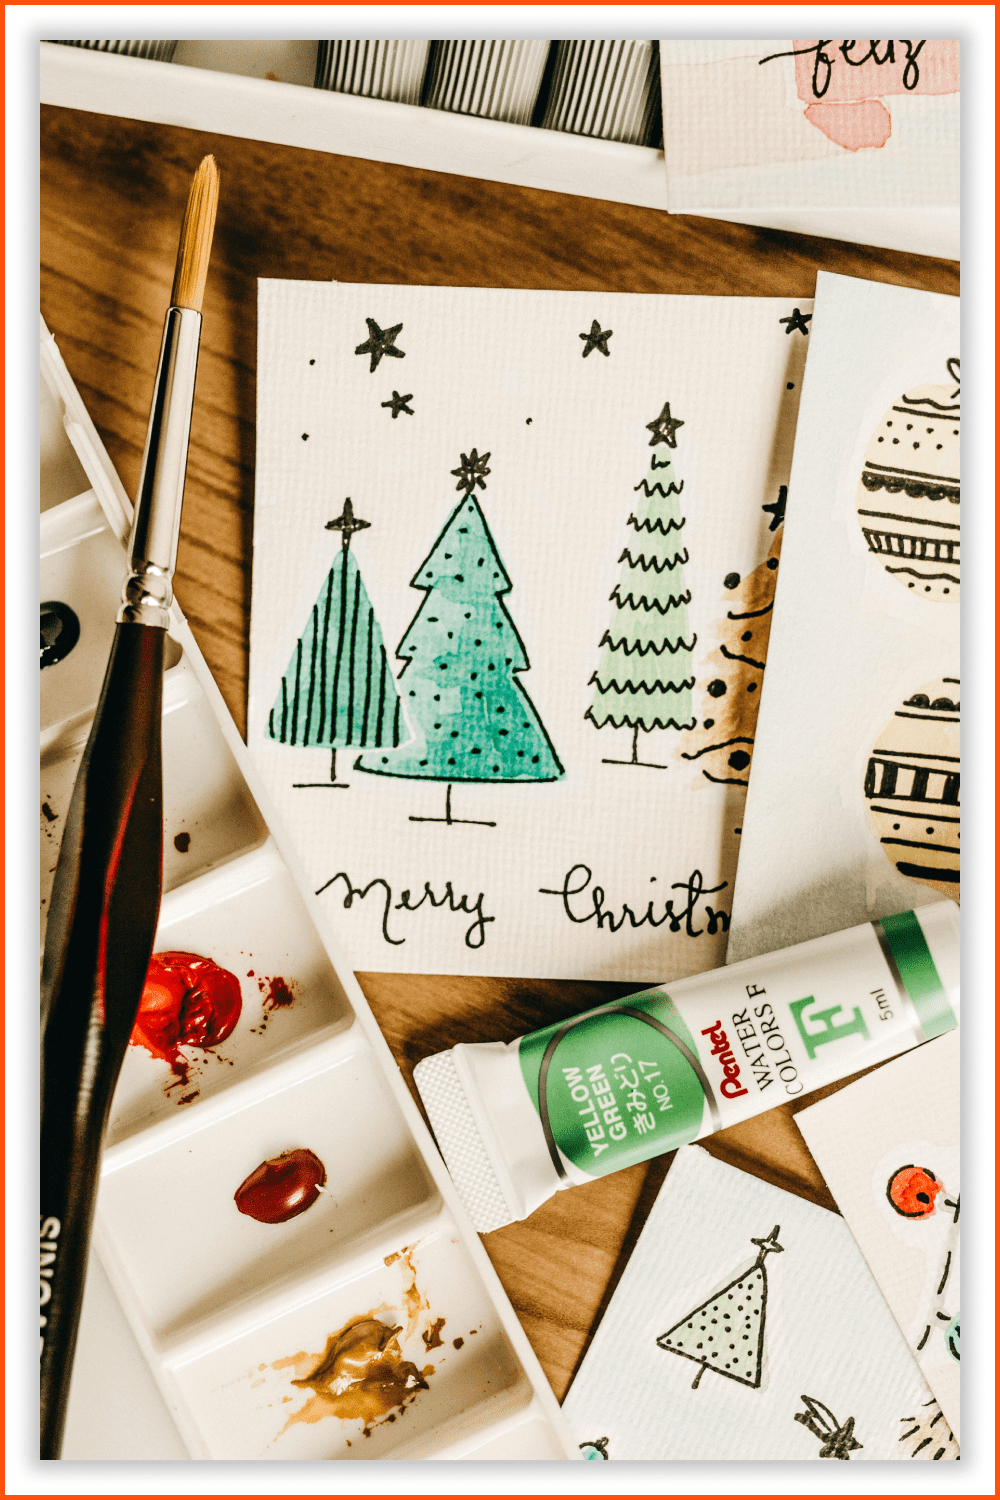 Photo of a cards with simple festive designs and painting stuff.